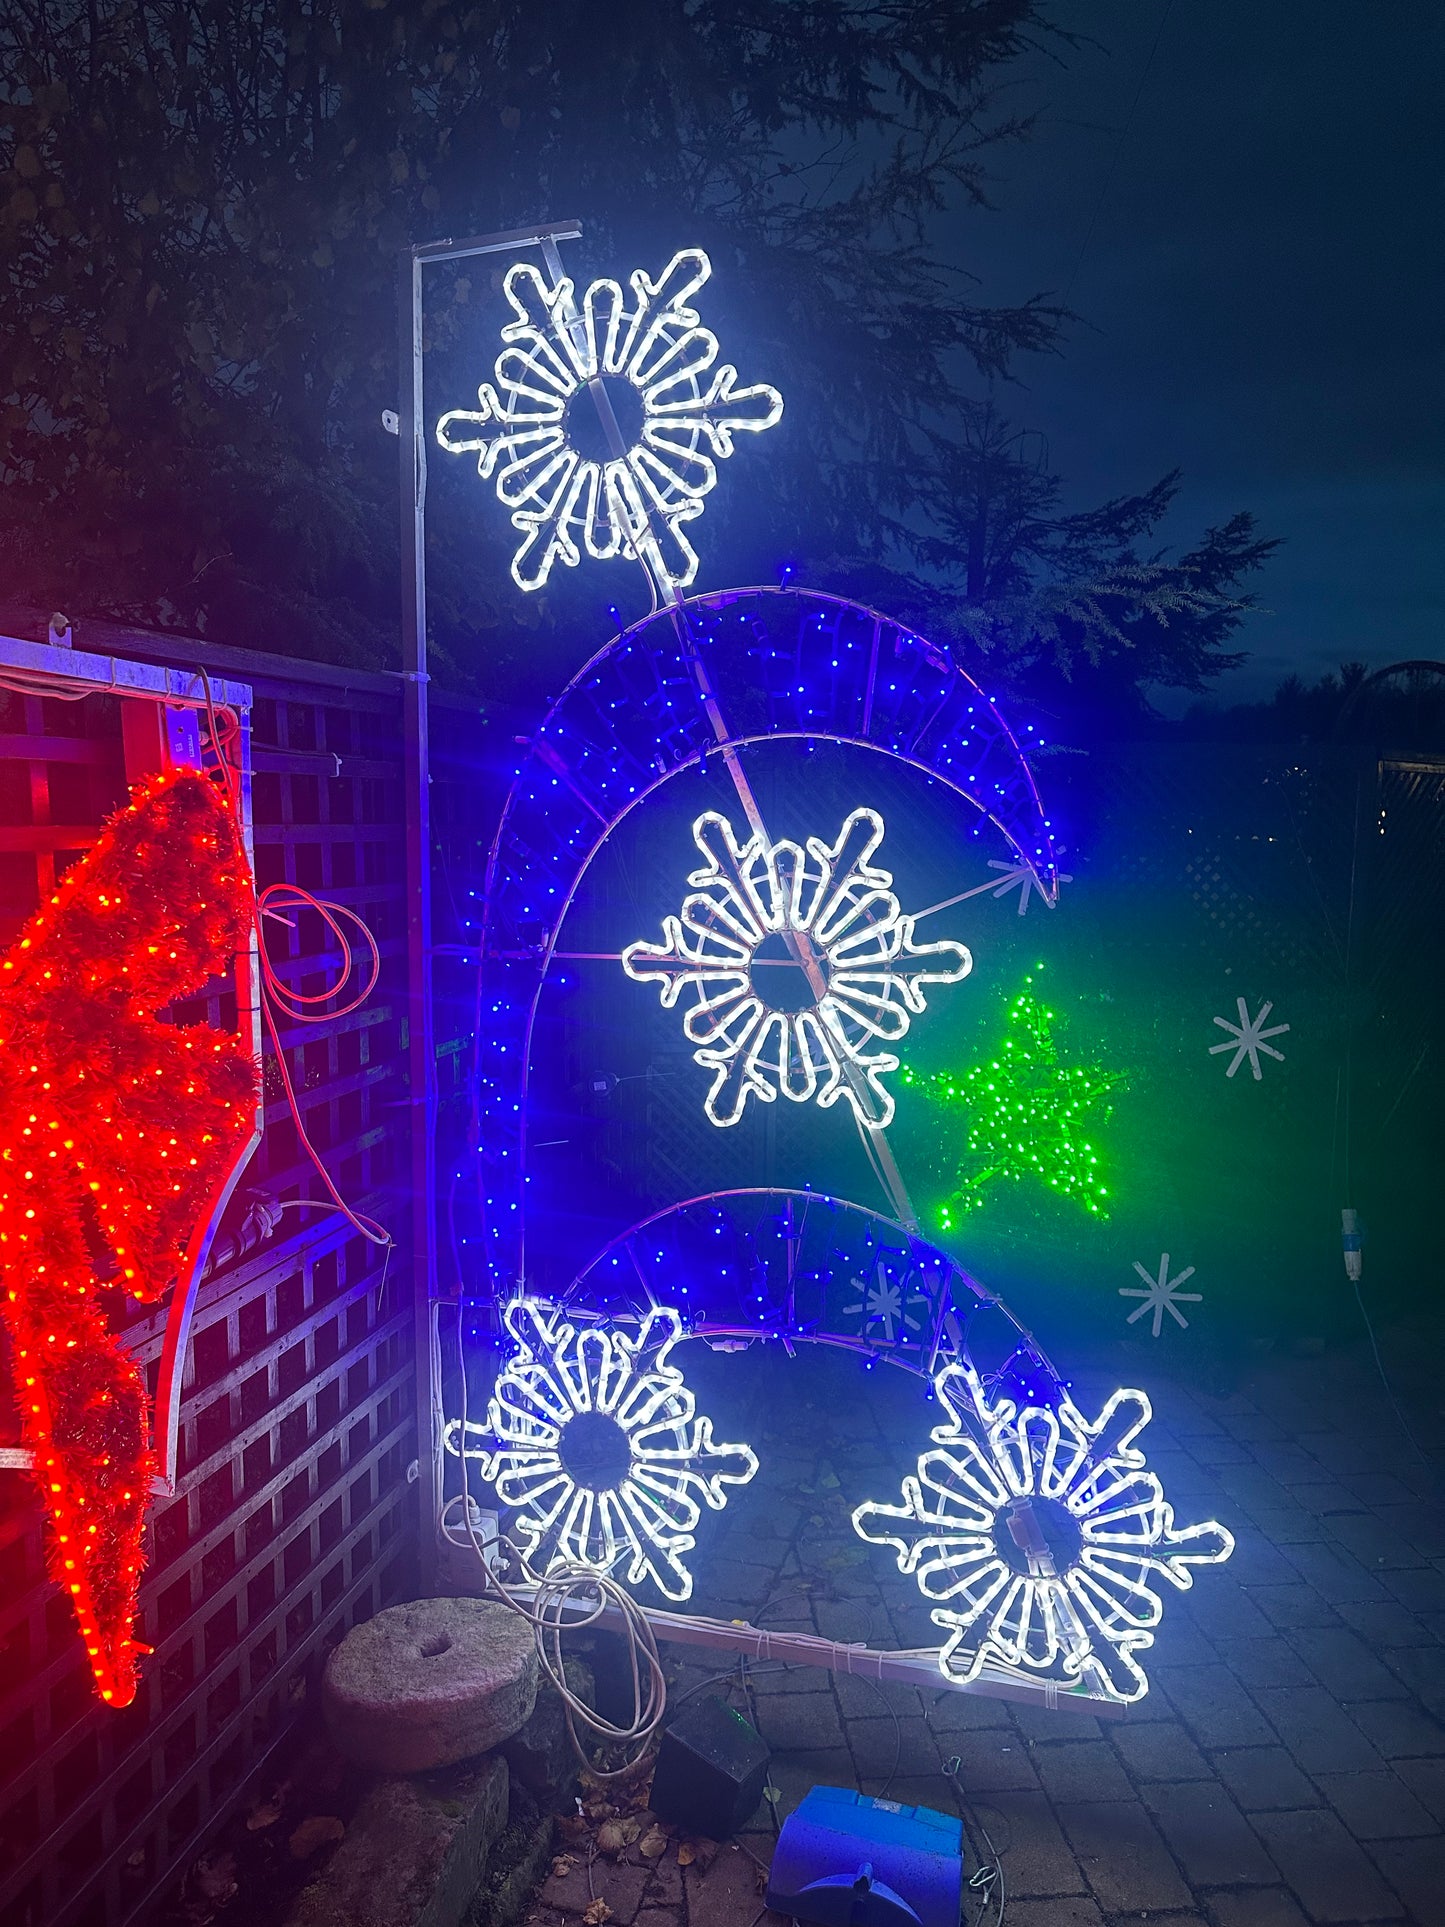 Giant Festive Lights -  Blue and White Snowflake With Swirl